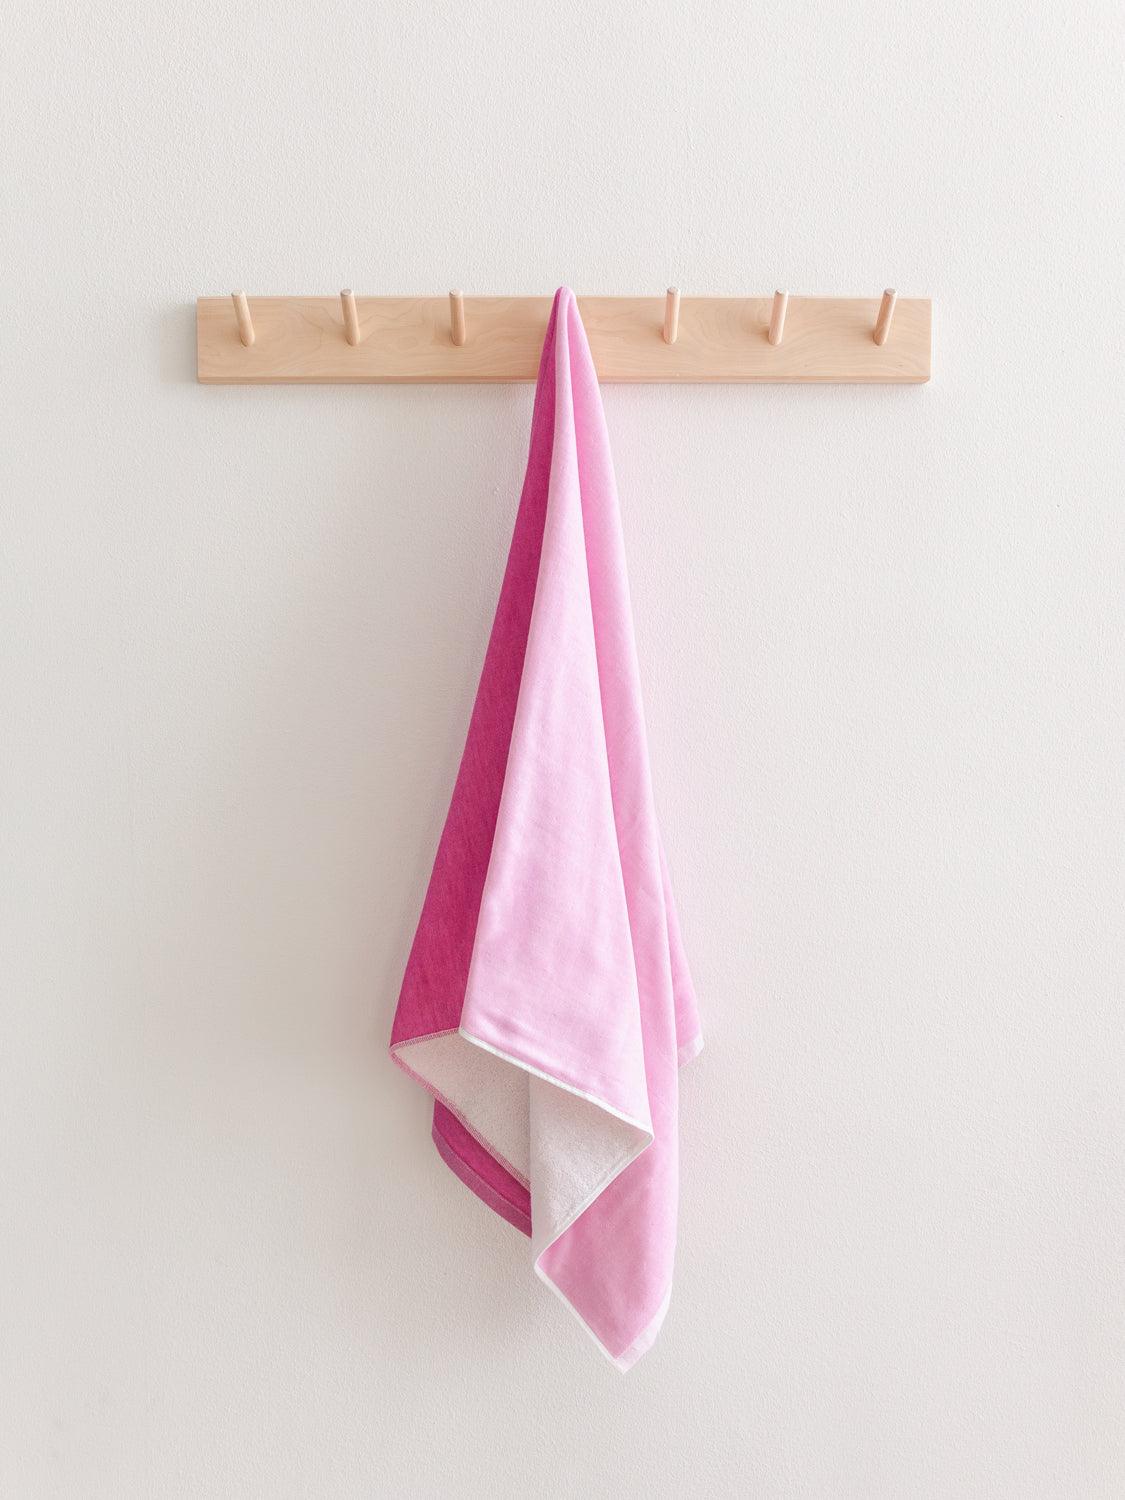 Two Tone Chambray Towel - Pink